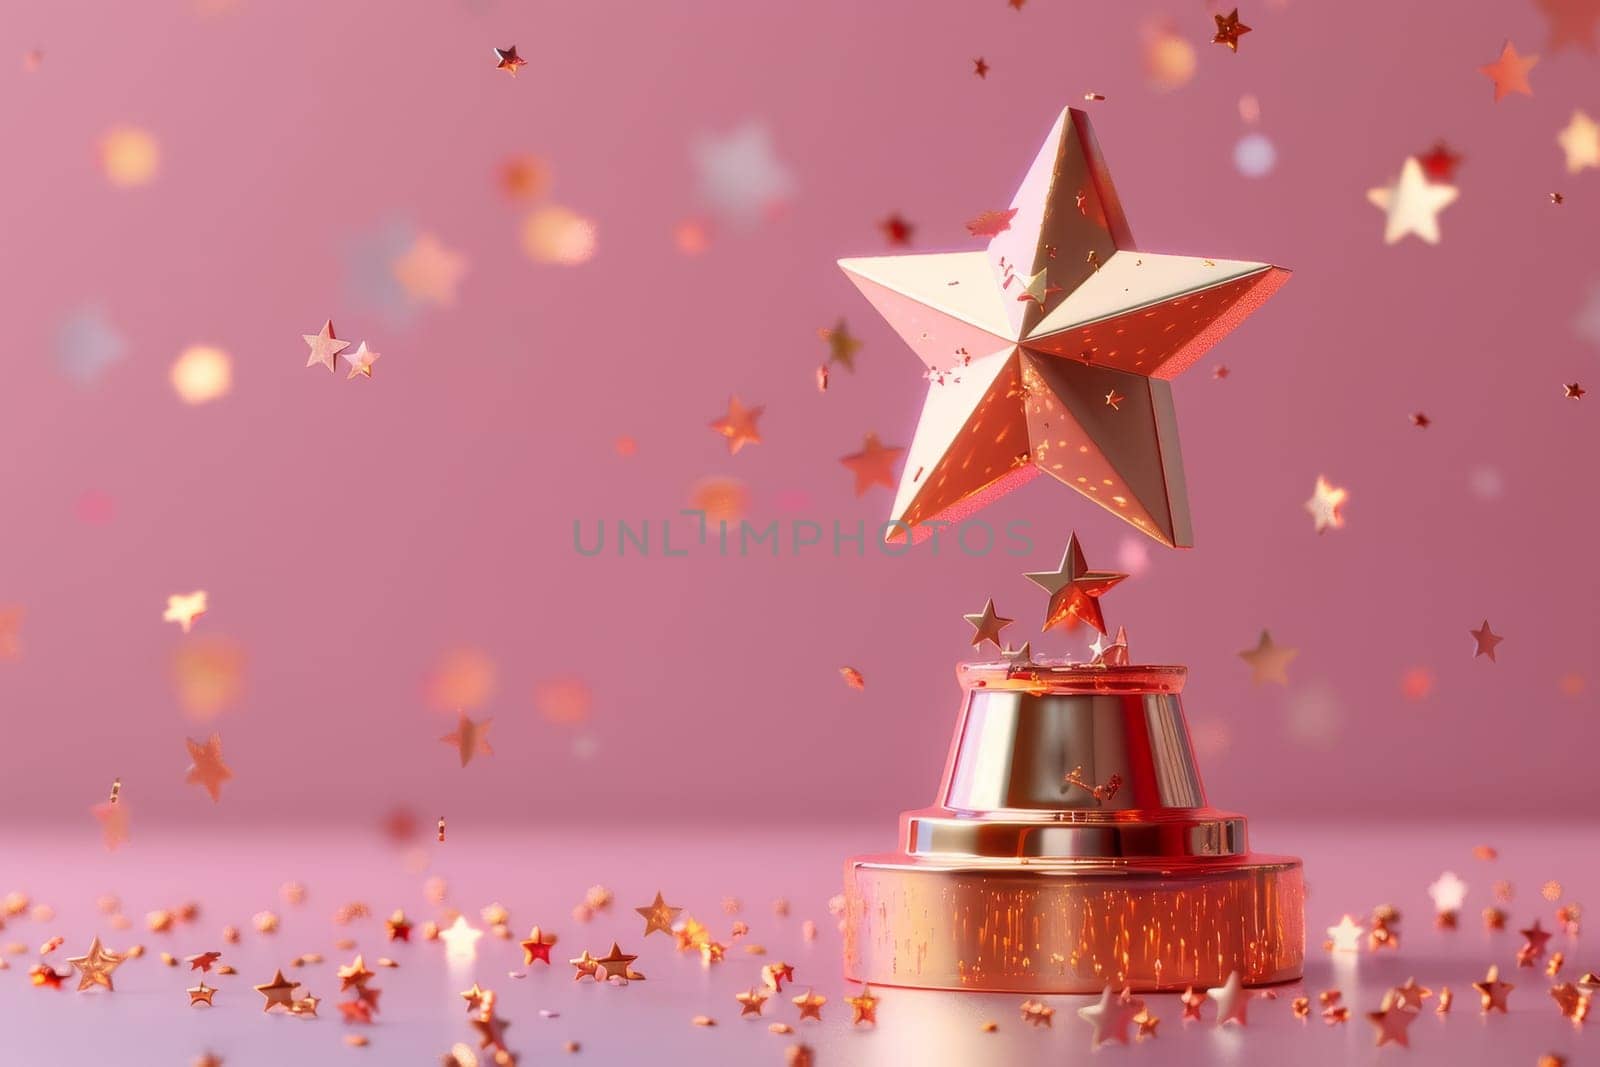 A gold star is sitting on a pink background. The star is surrounded by glitter, giving it a festive and celebratory feel